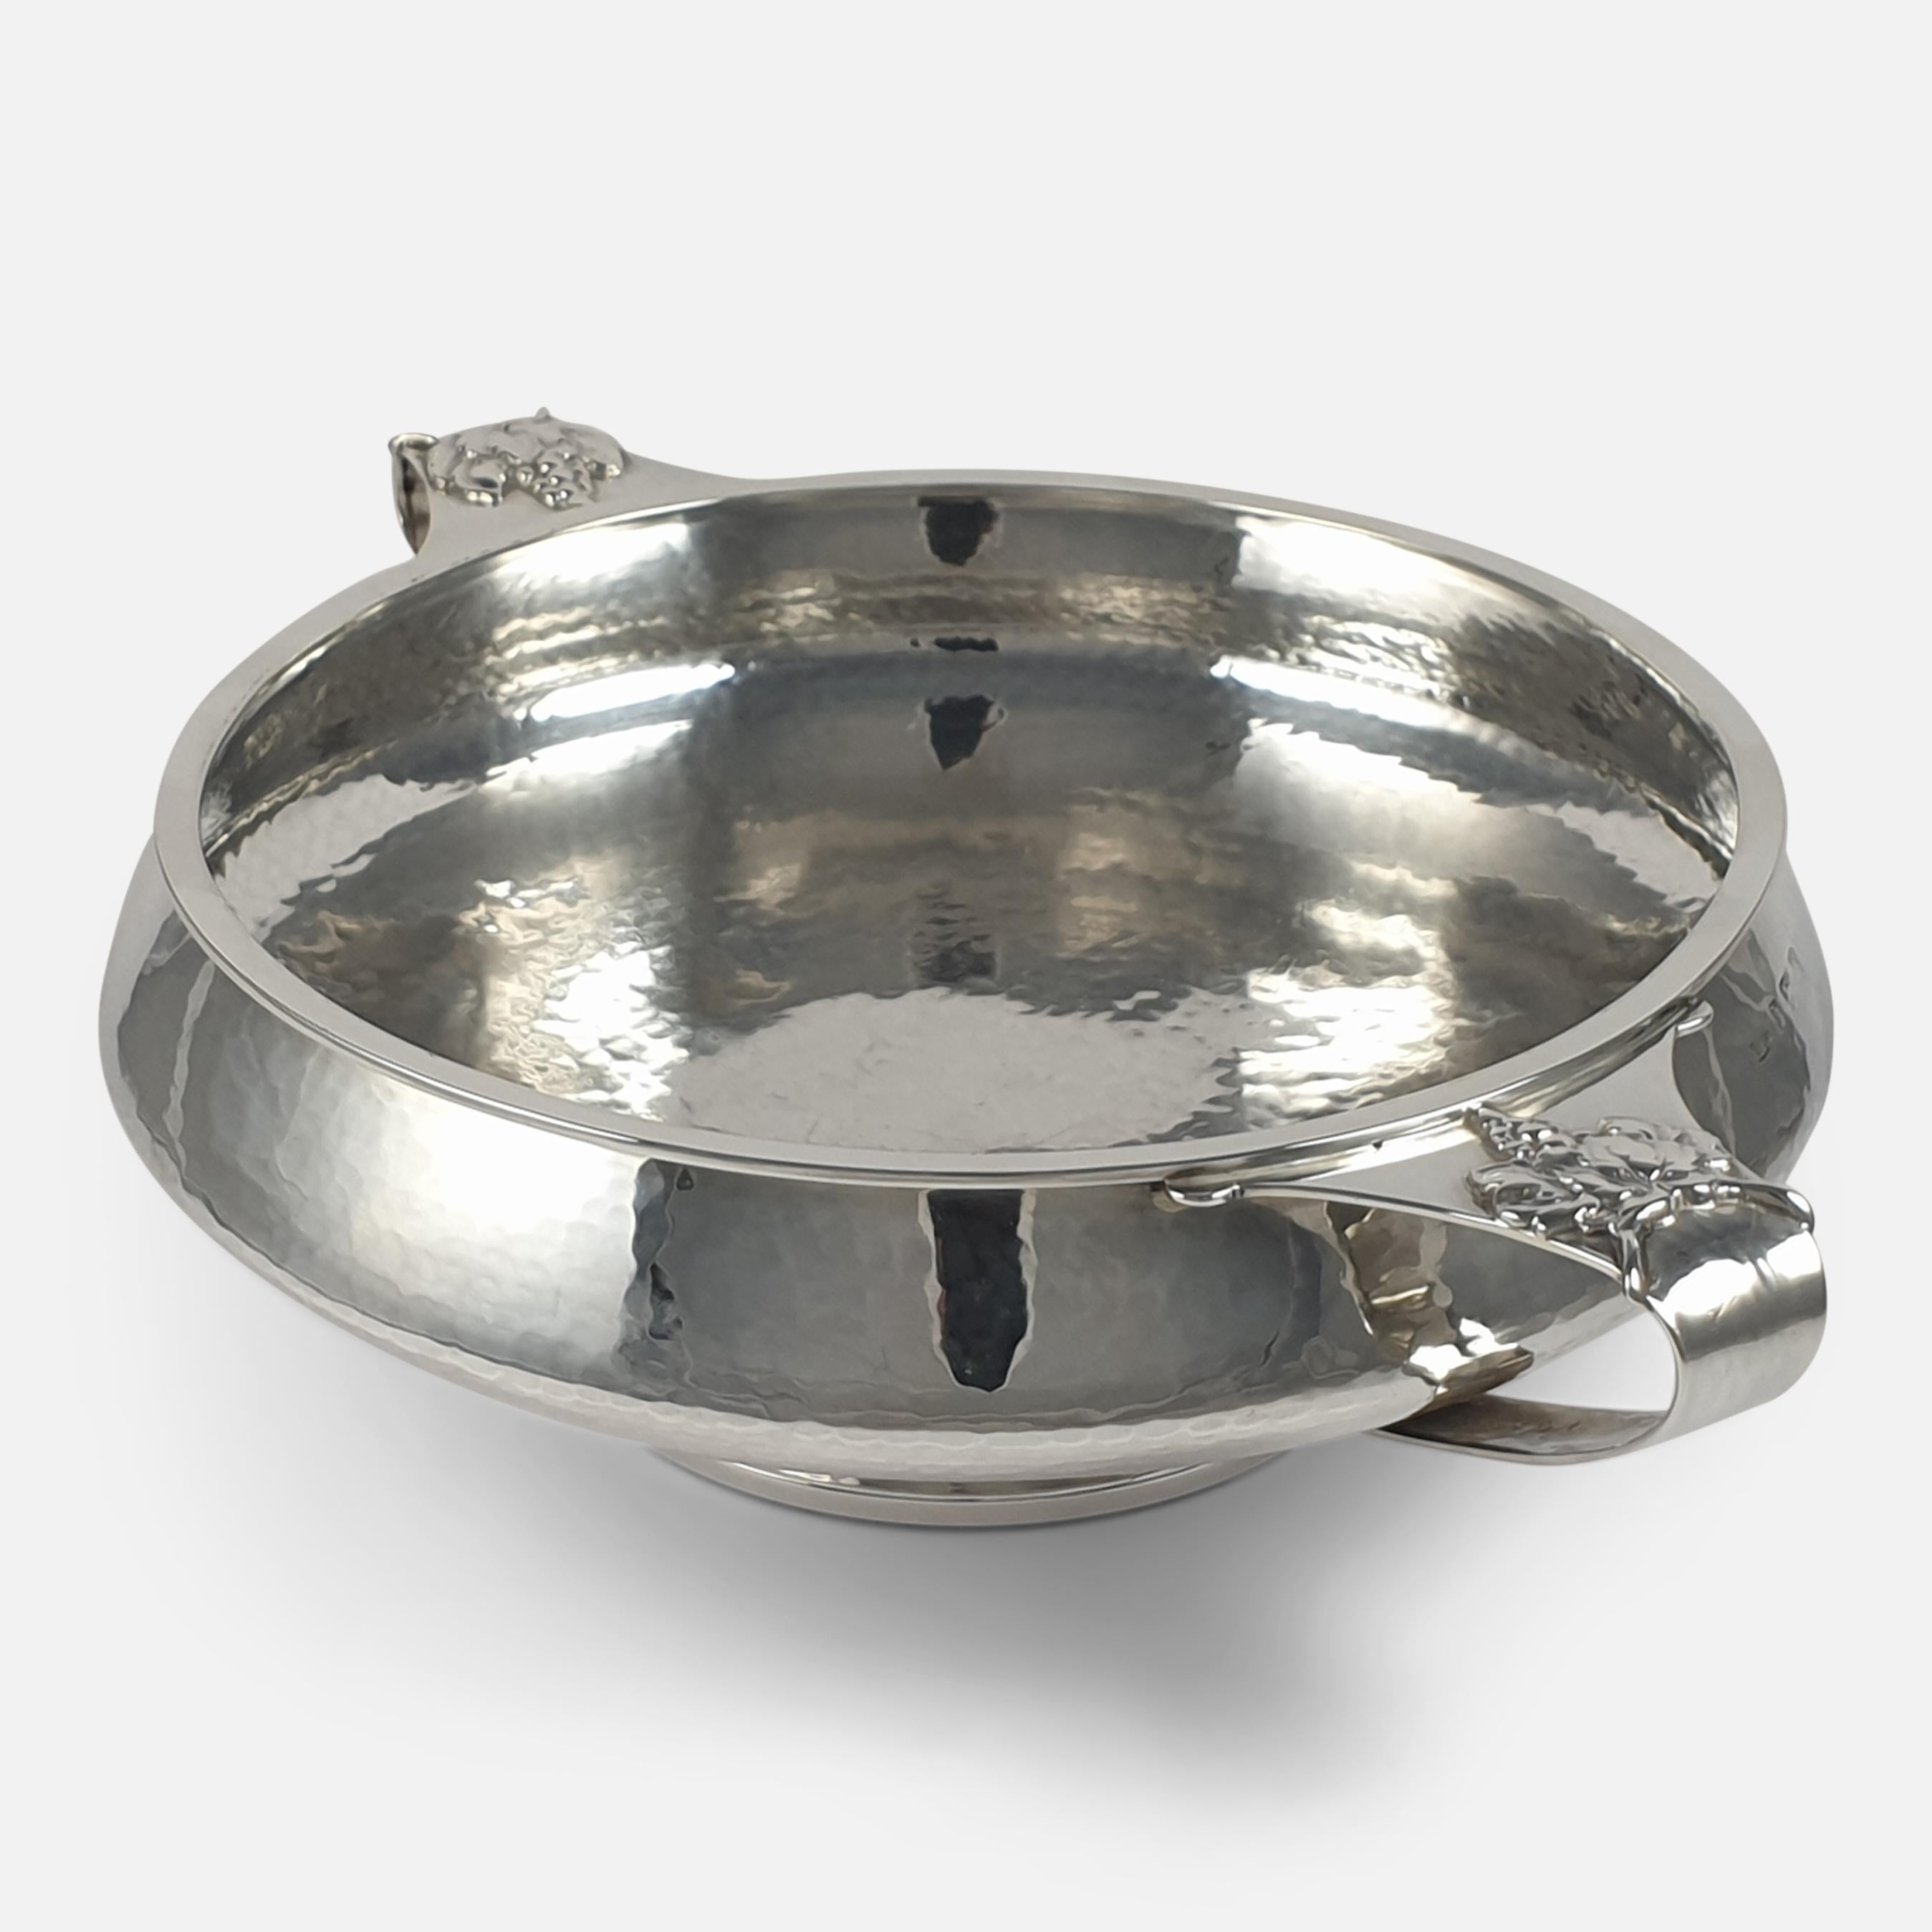 Early 20th Century Arts & Crafts Sterling Silver Twin-Handled Hammered Bowl, A. E. Jones, 1928